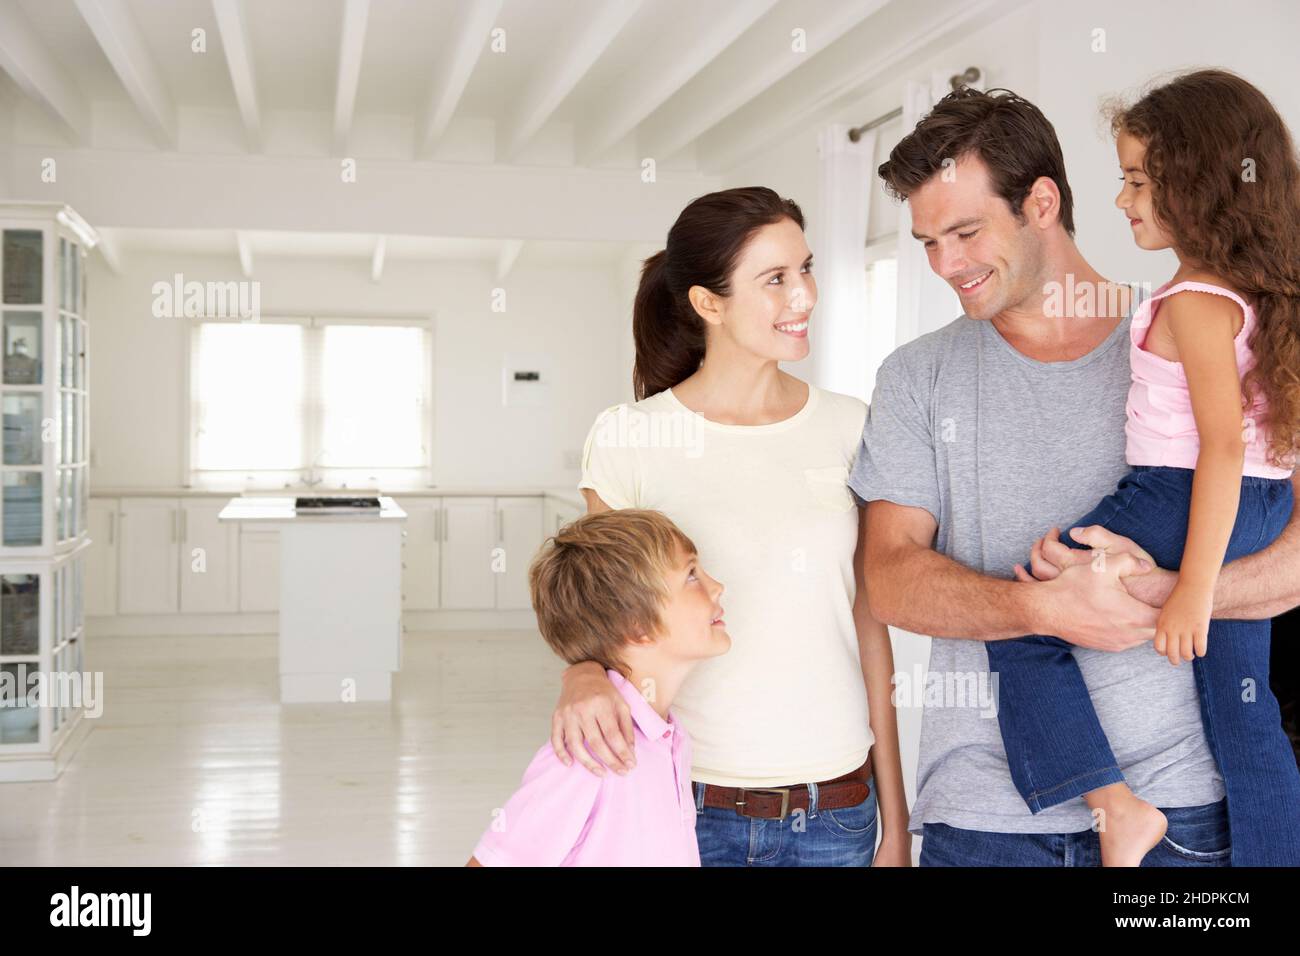 family, appartment showing, families Stock Photo